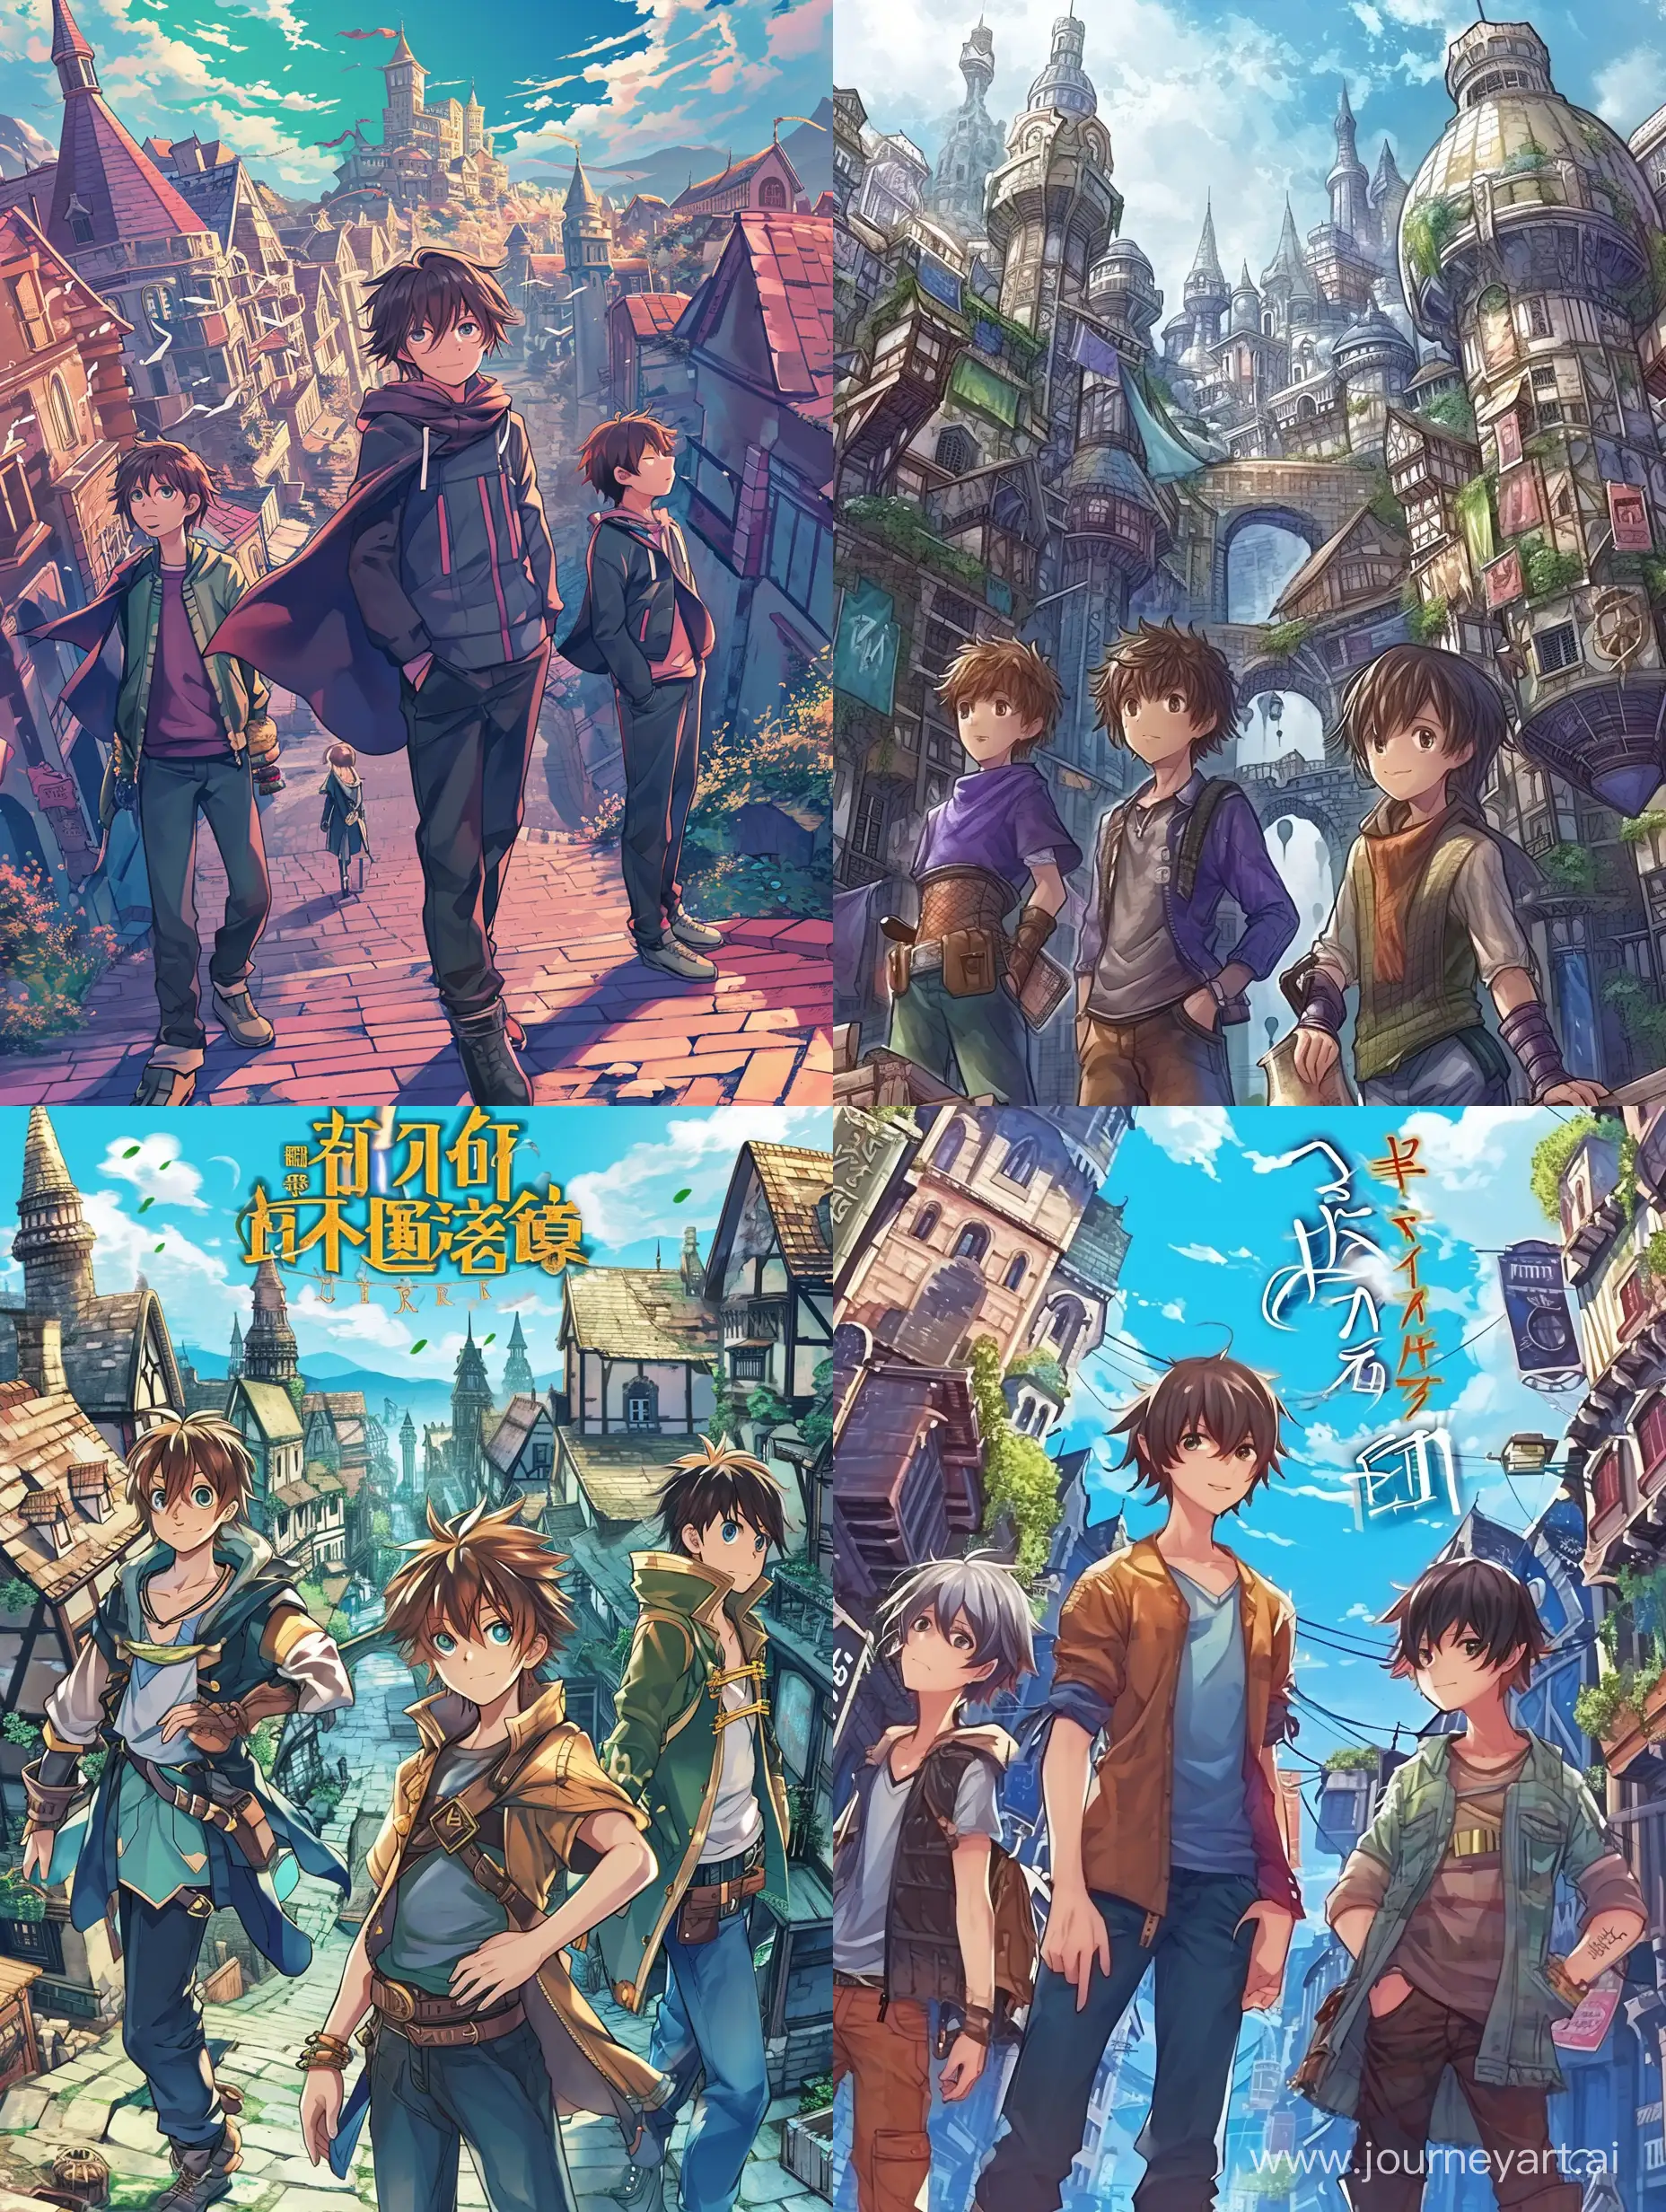 The cover for light novel(ranobe), three boys and one girl, fantasy city, fantasy world with buildings.